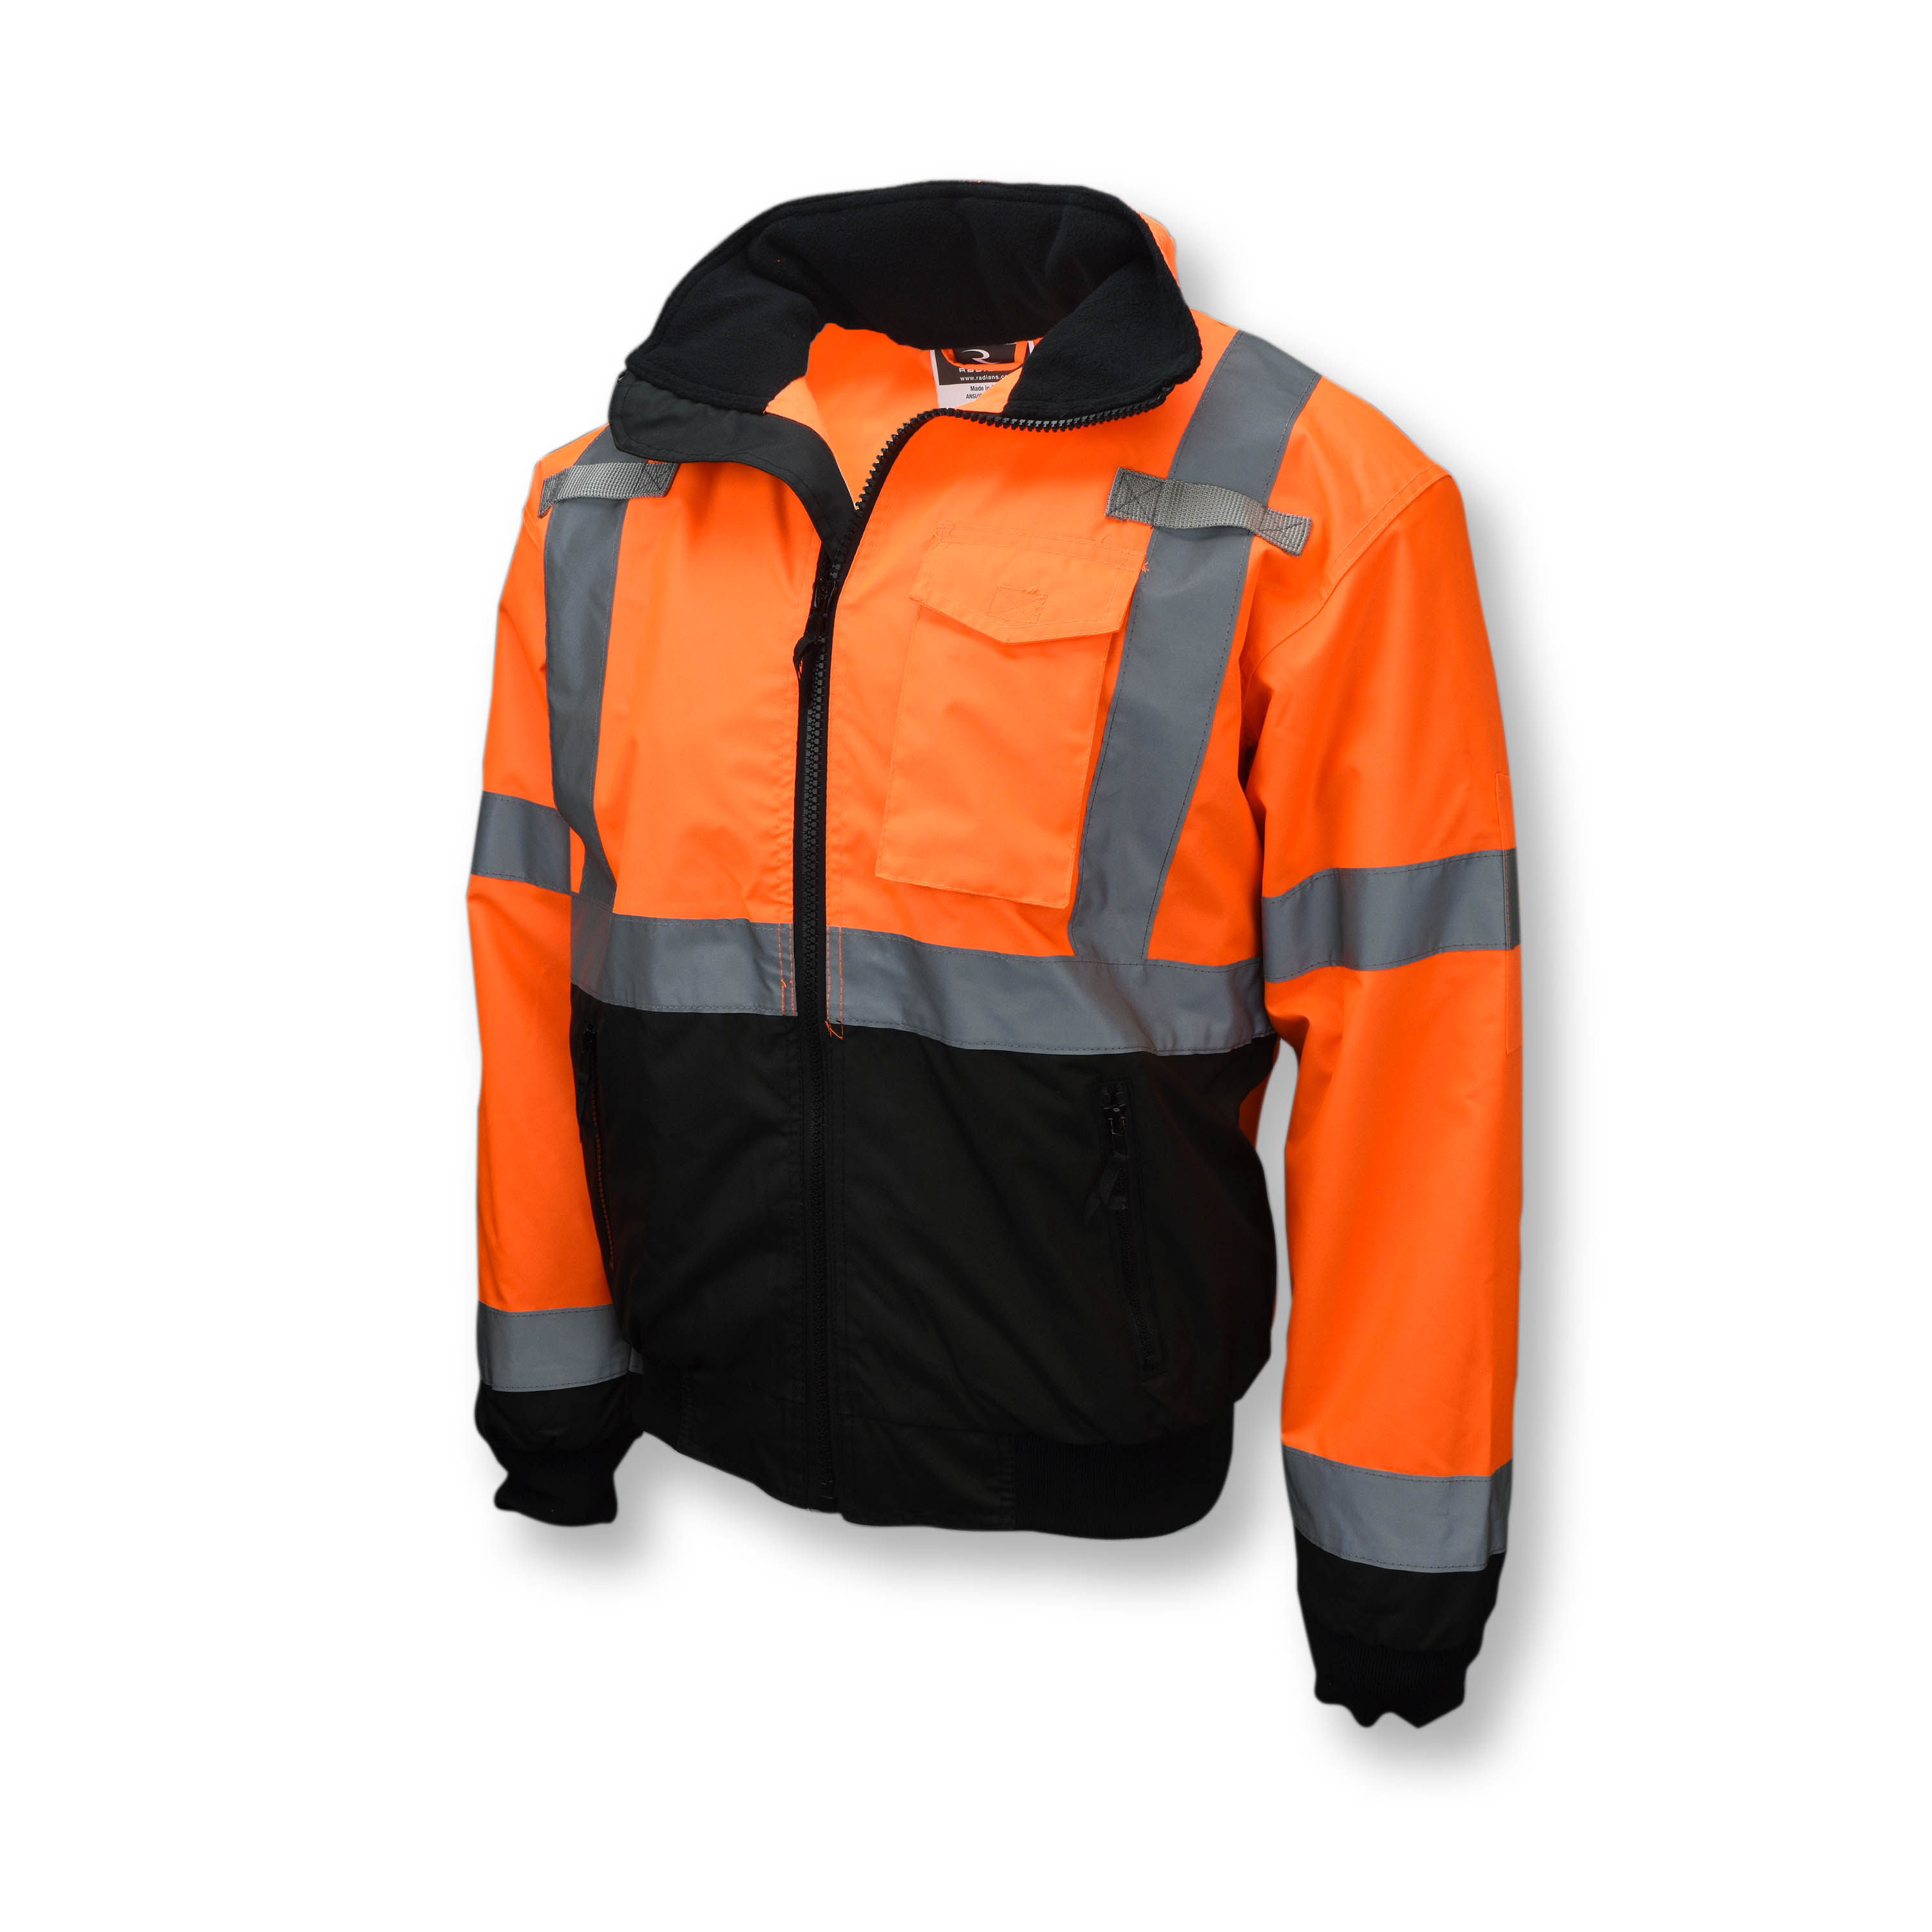 SJ110B Class 3 Two-in-One High Visibility Bomber Safety Jacket - Orange/Black Bottom - Size 2X